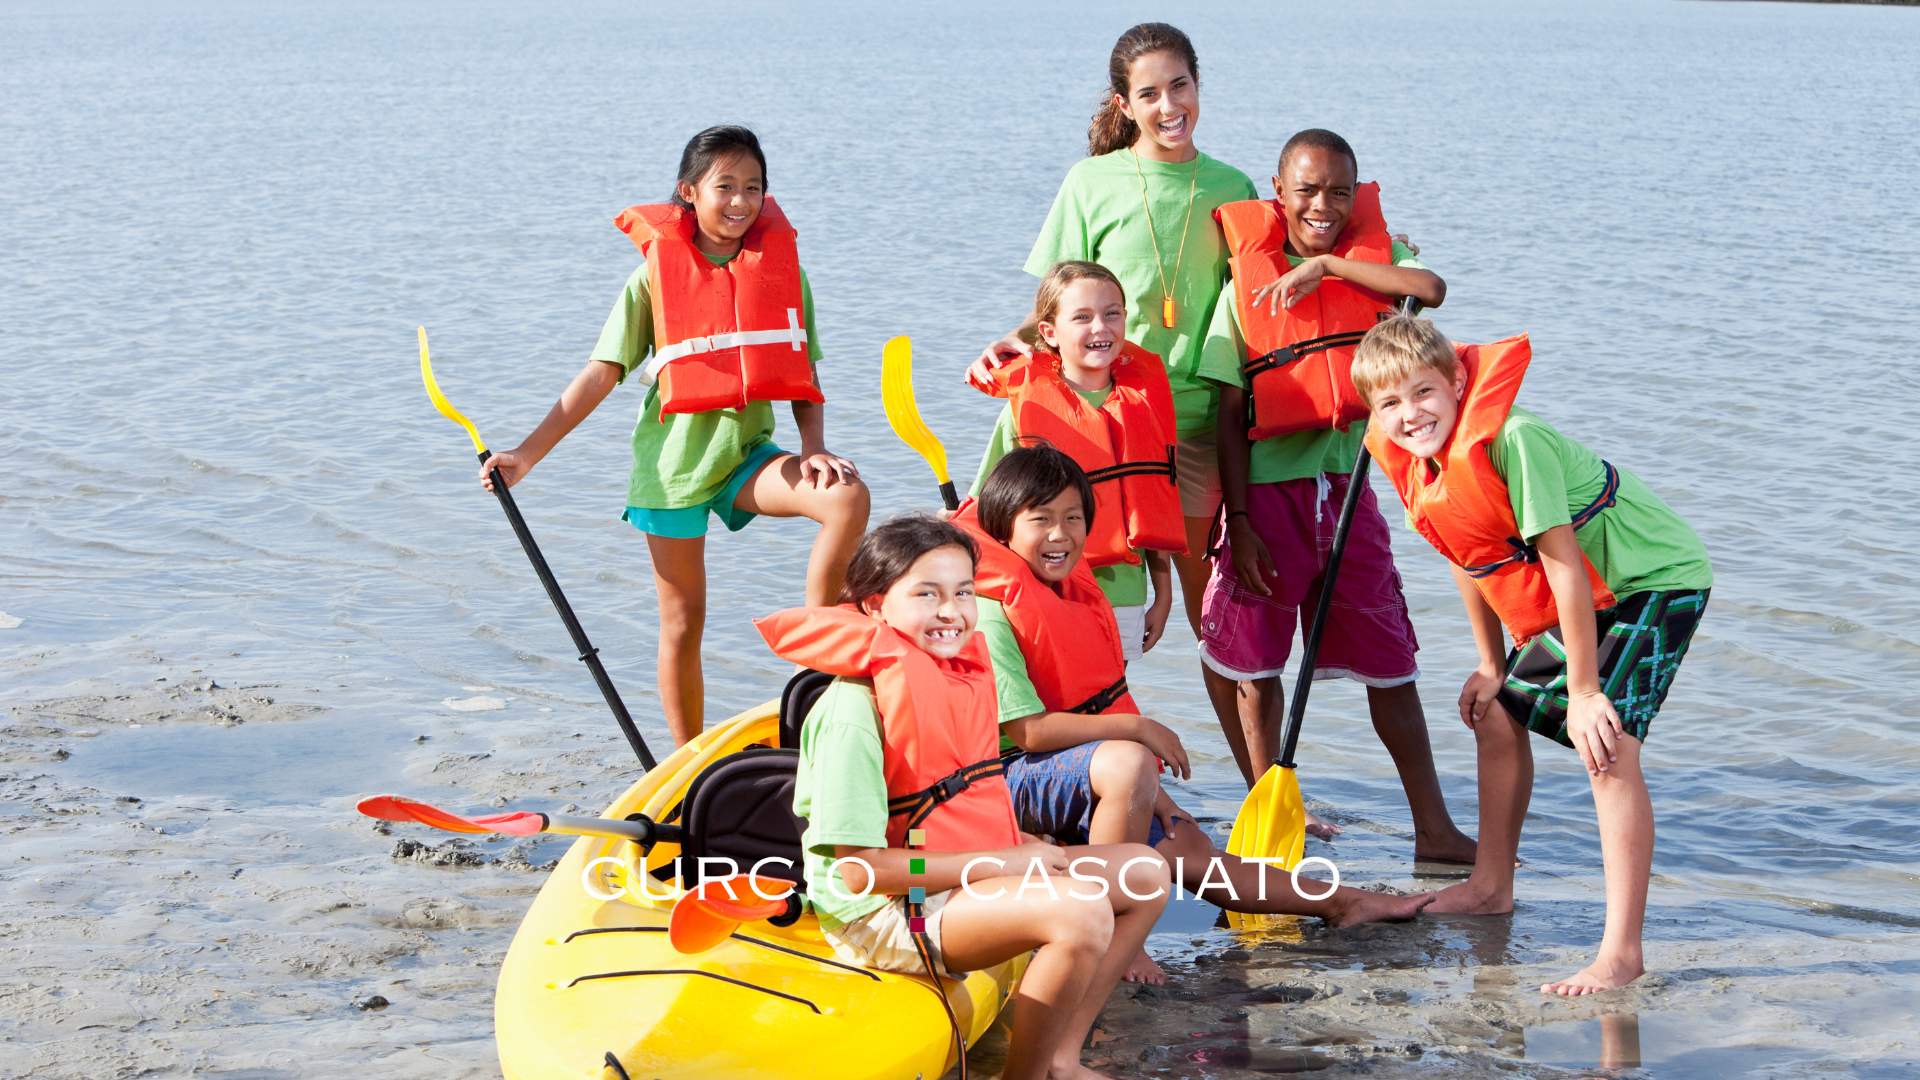 Chicago Summer Camp Drowning Accident Lawyer